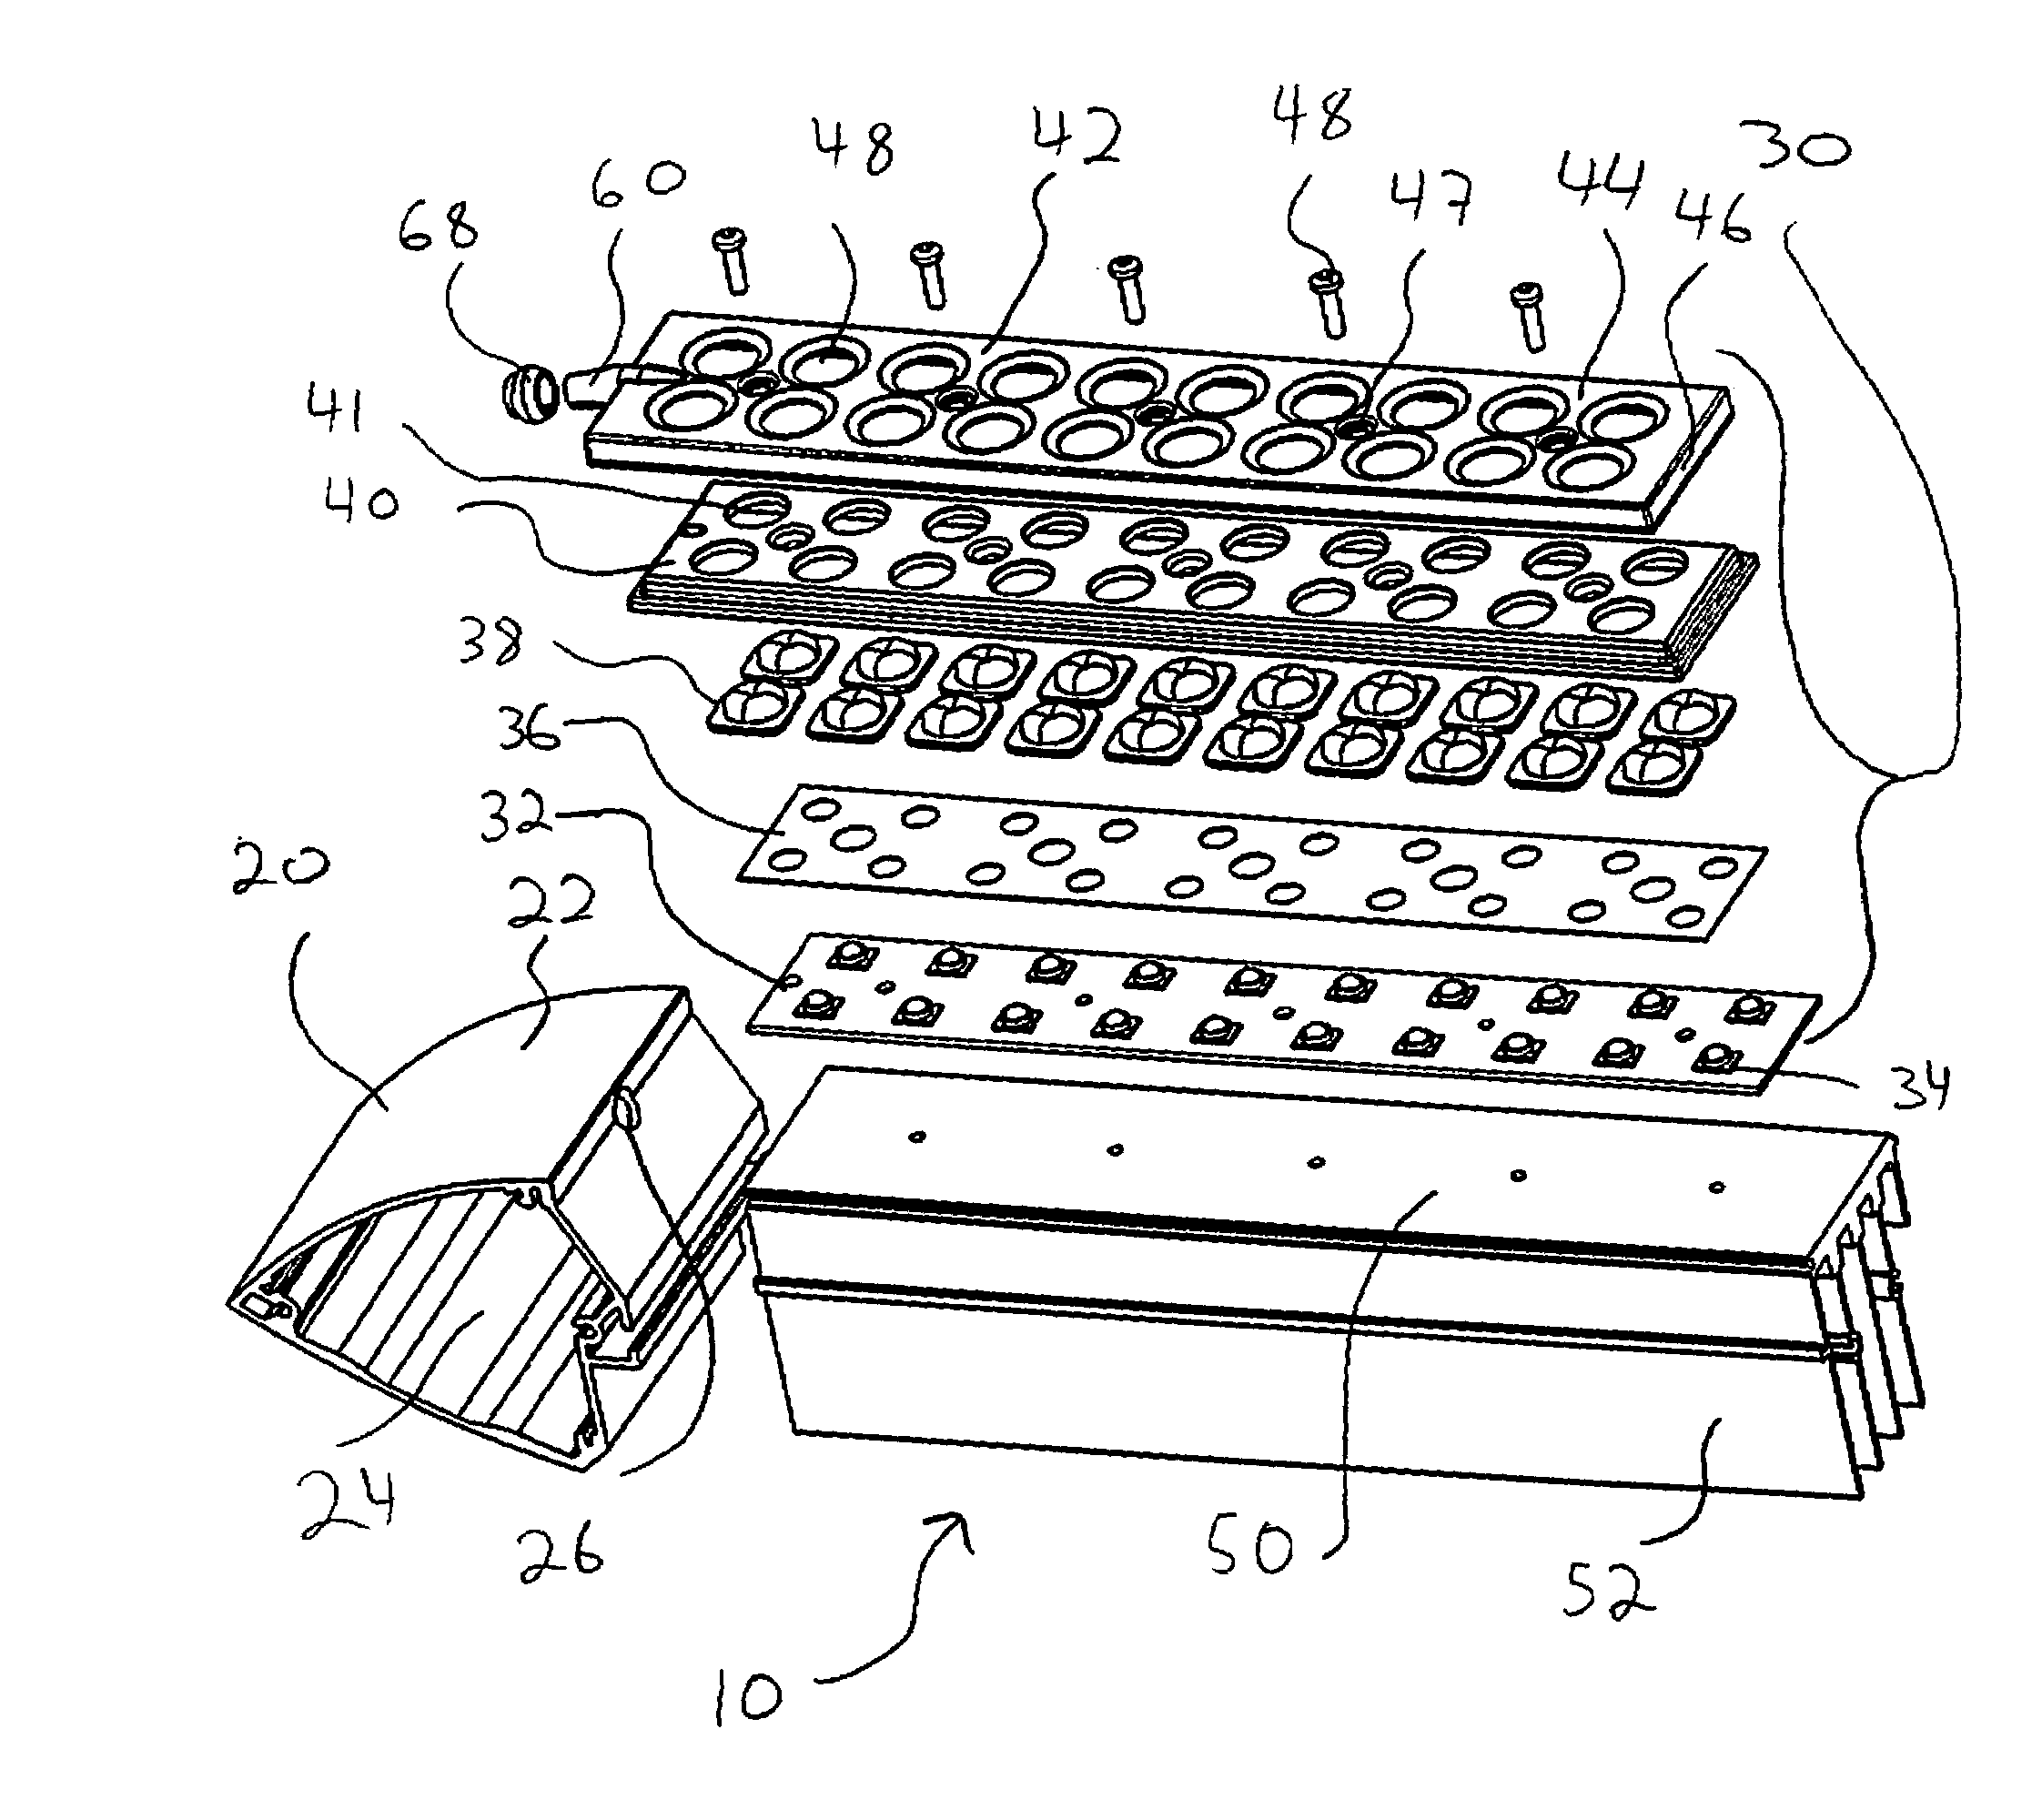 Multi-LED light fixture with secure arrangement for LED-array wiring